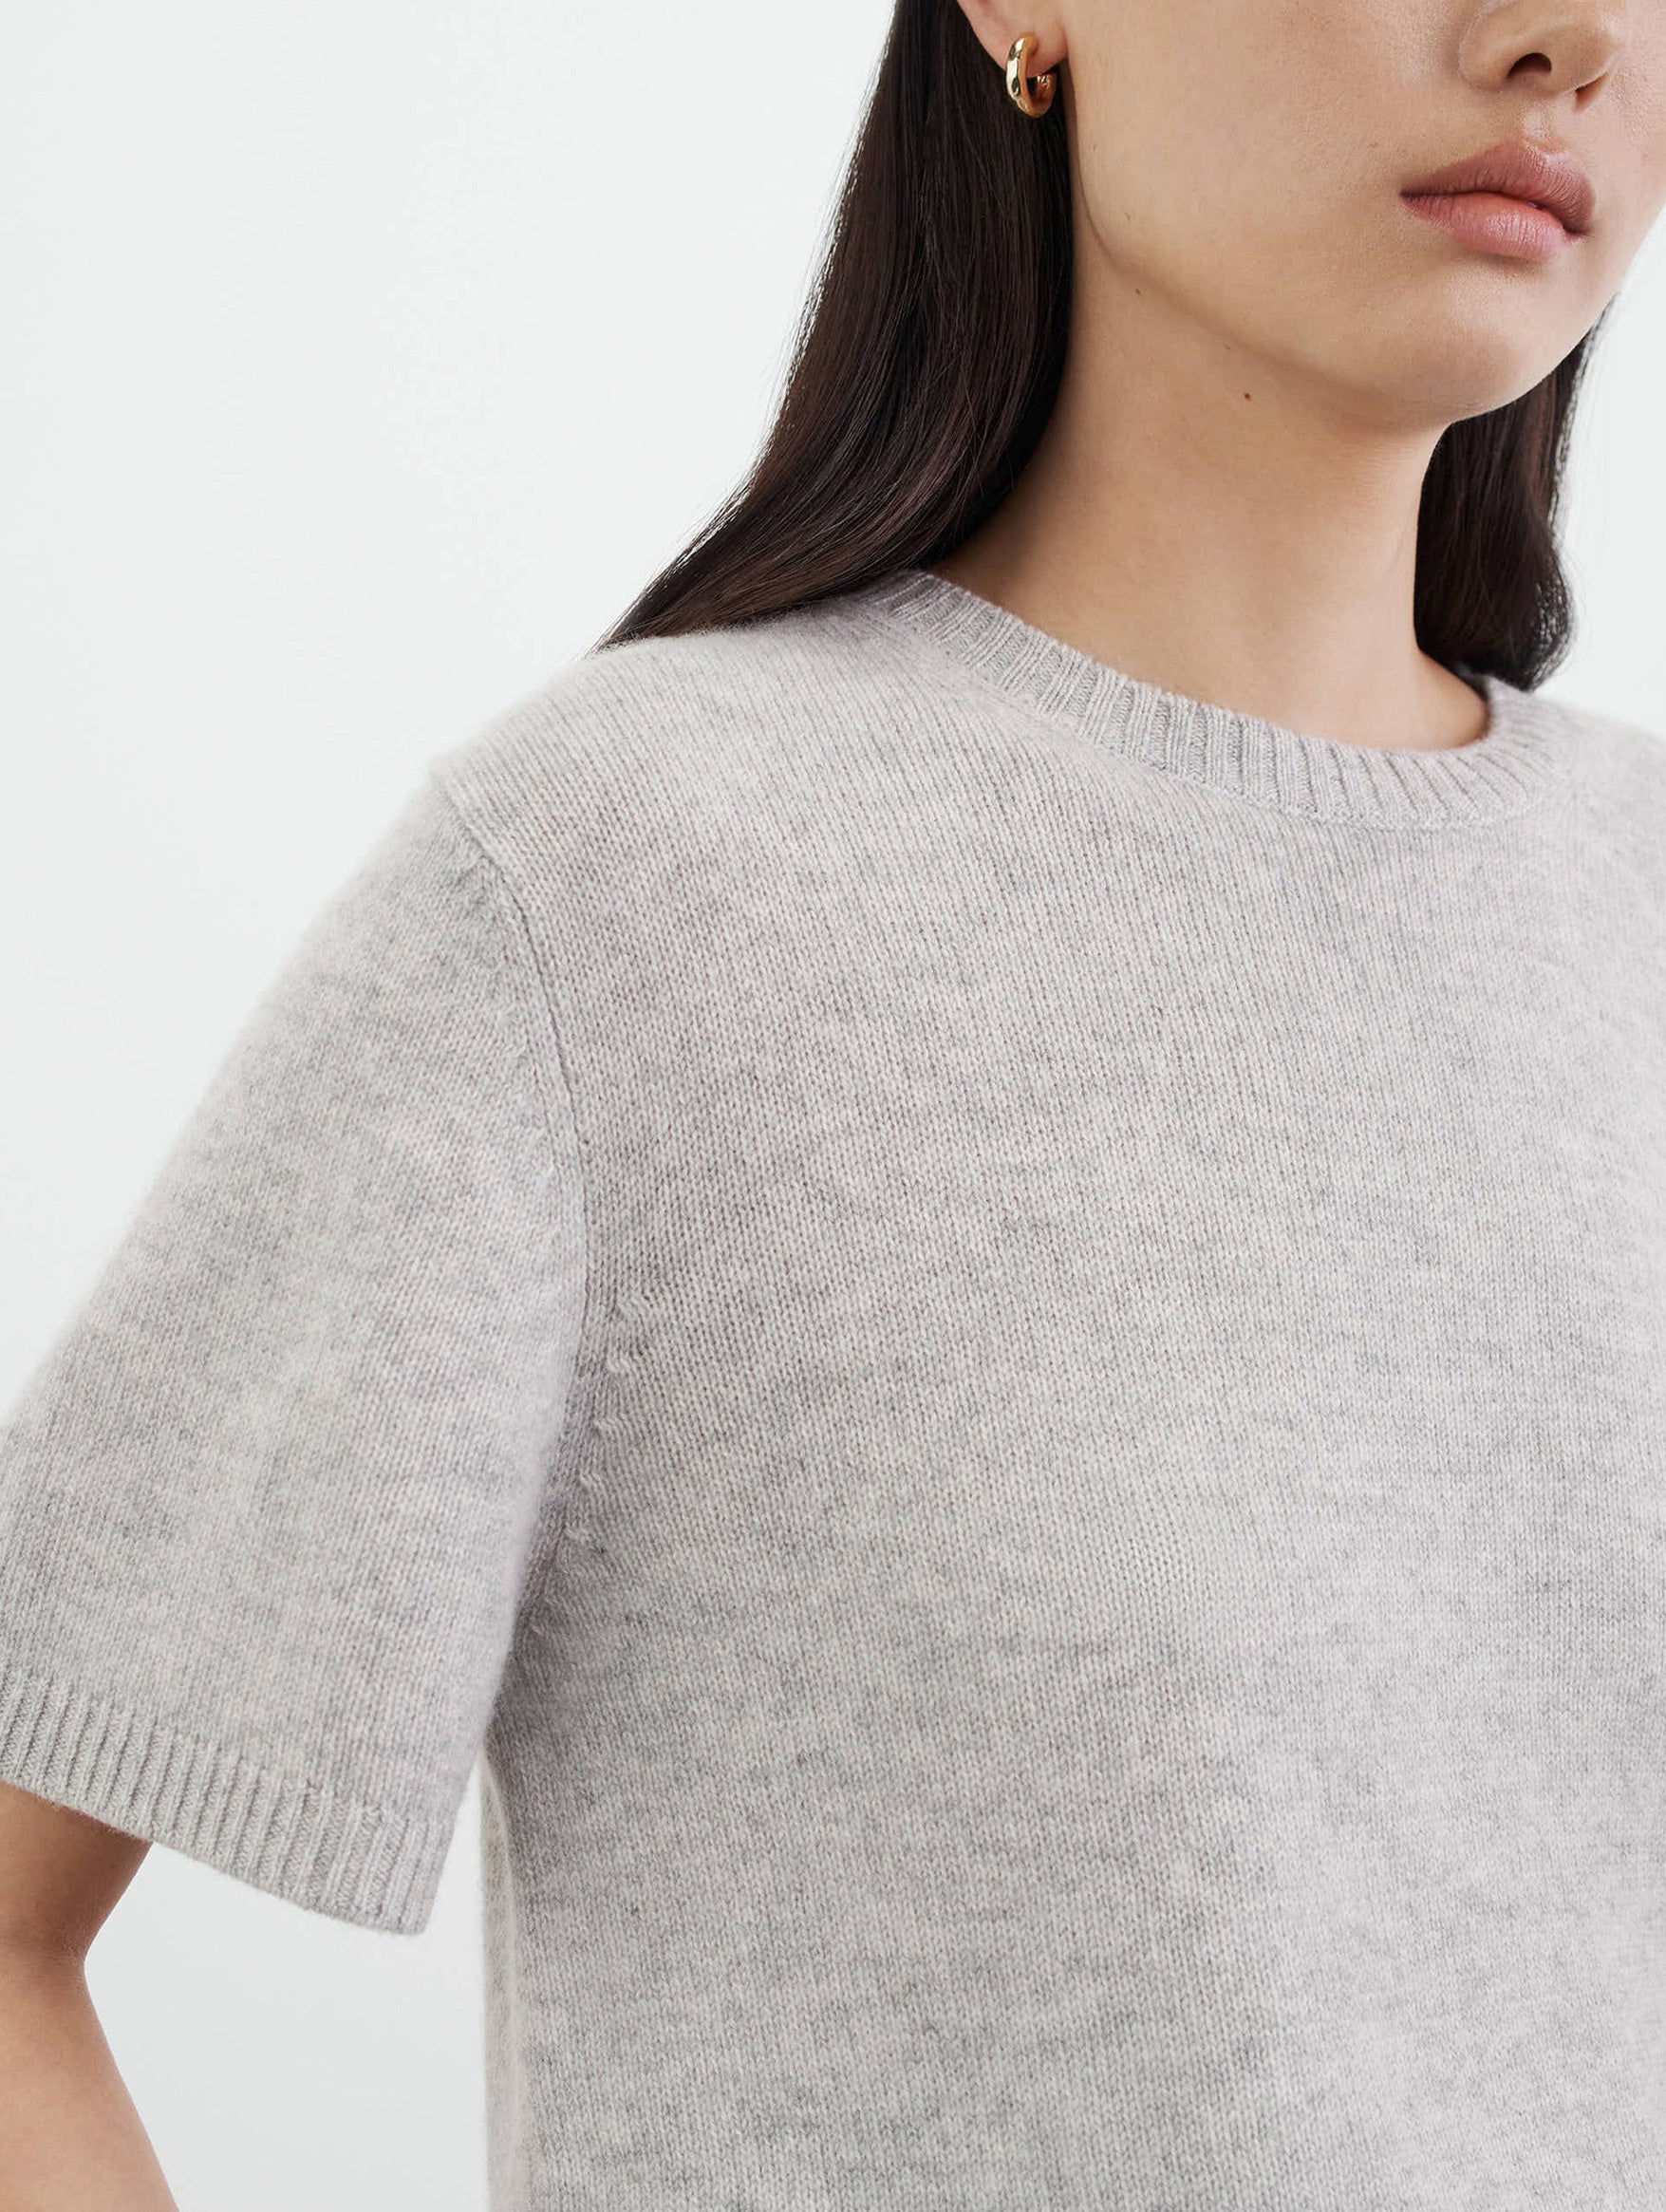 Chunky Cashmere T-Shirt in Light Grey